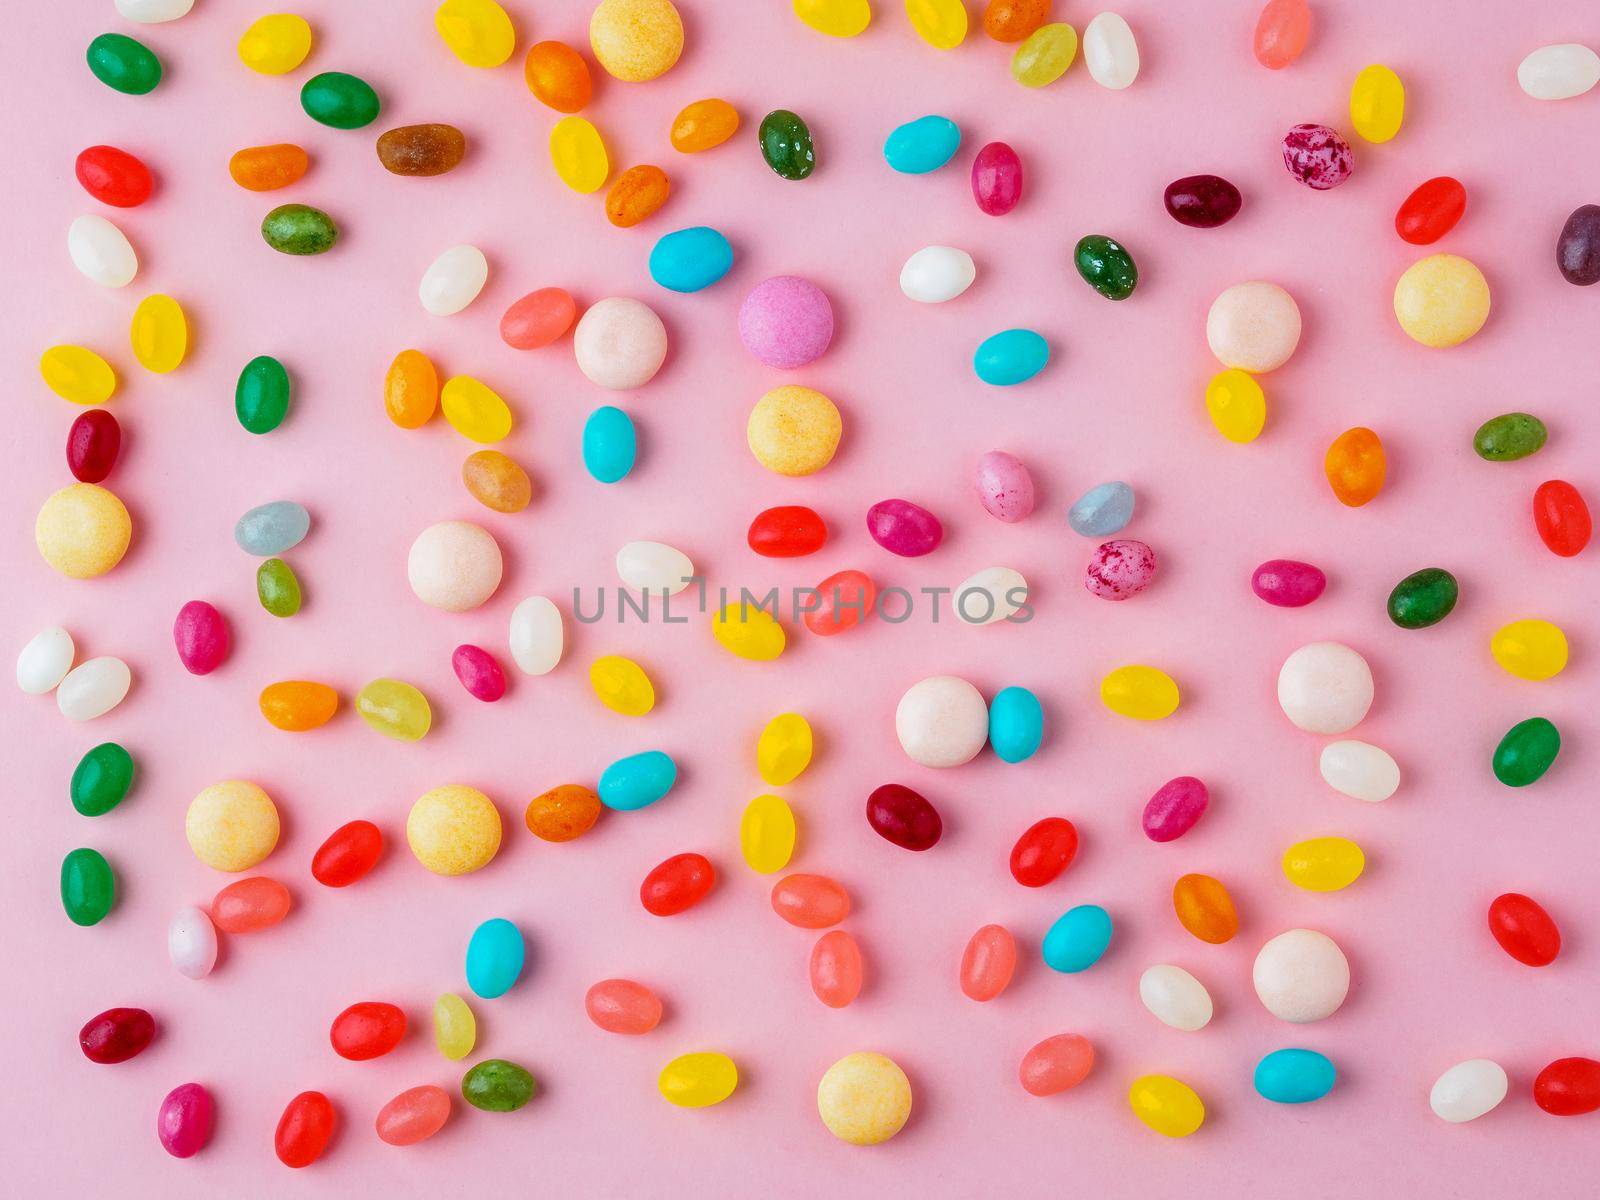 Many scattered colorful sweets, candies, lollipops on bright pink background, top view